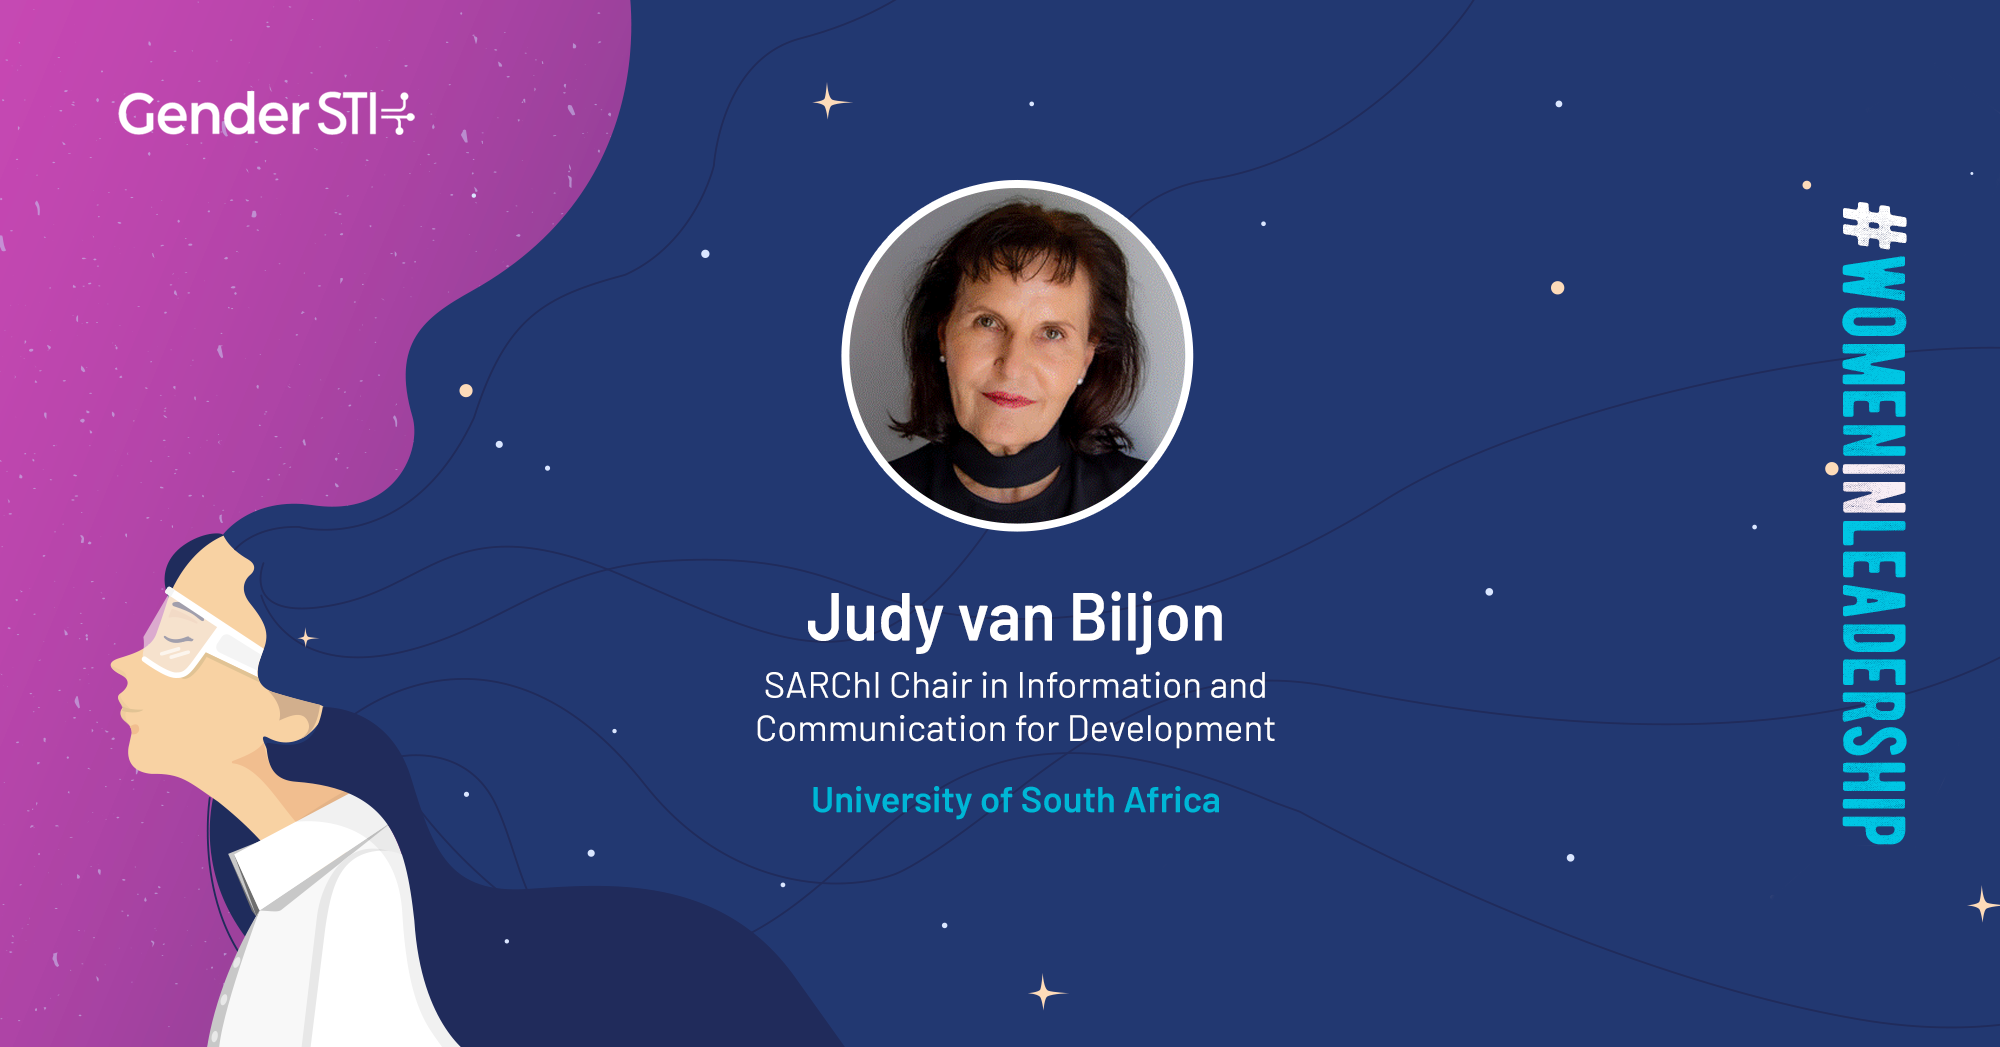 Judy van Biljon, the SARChI Chair in Information and Communication for Development (ICT4D), is one of Gender STI's #WomenInLeadership nominees.